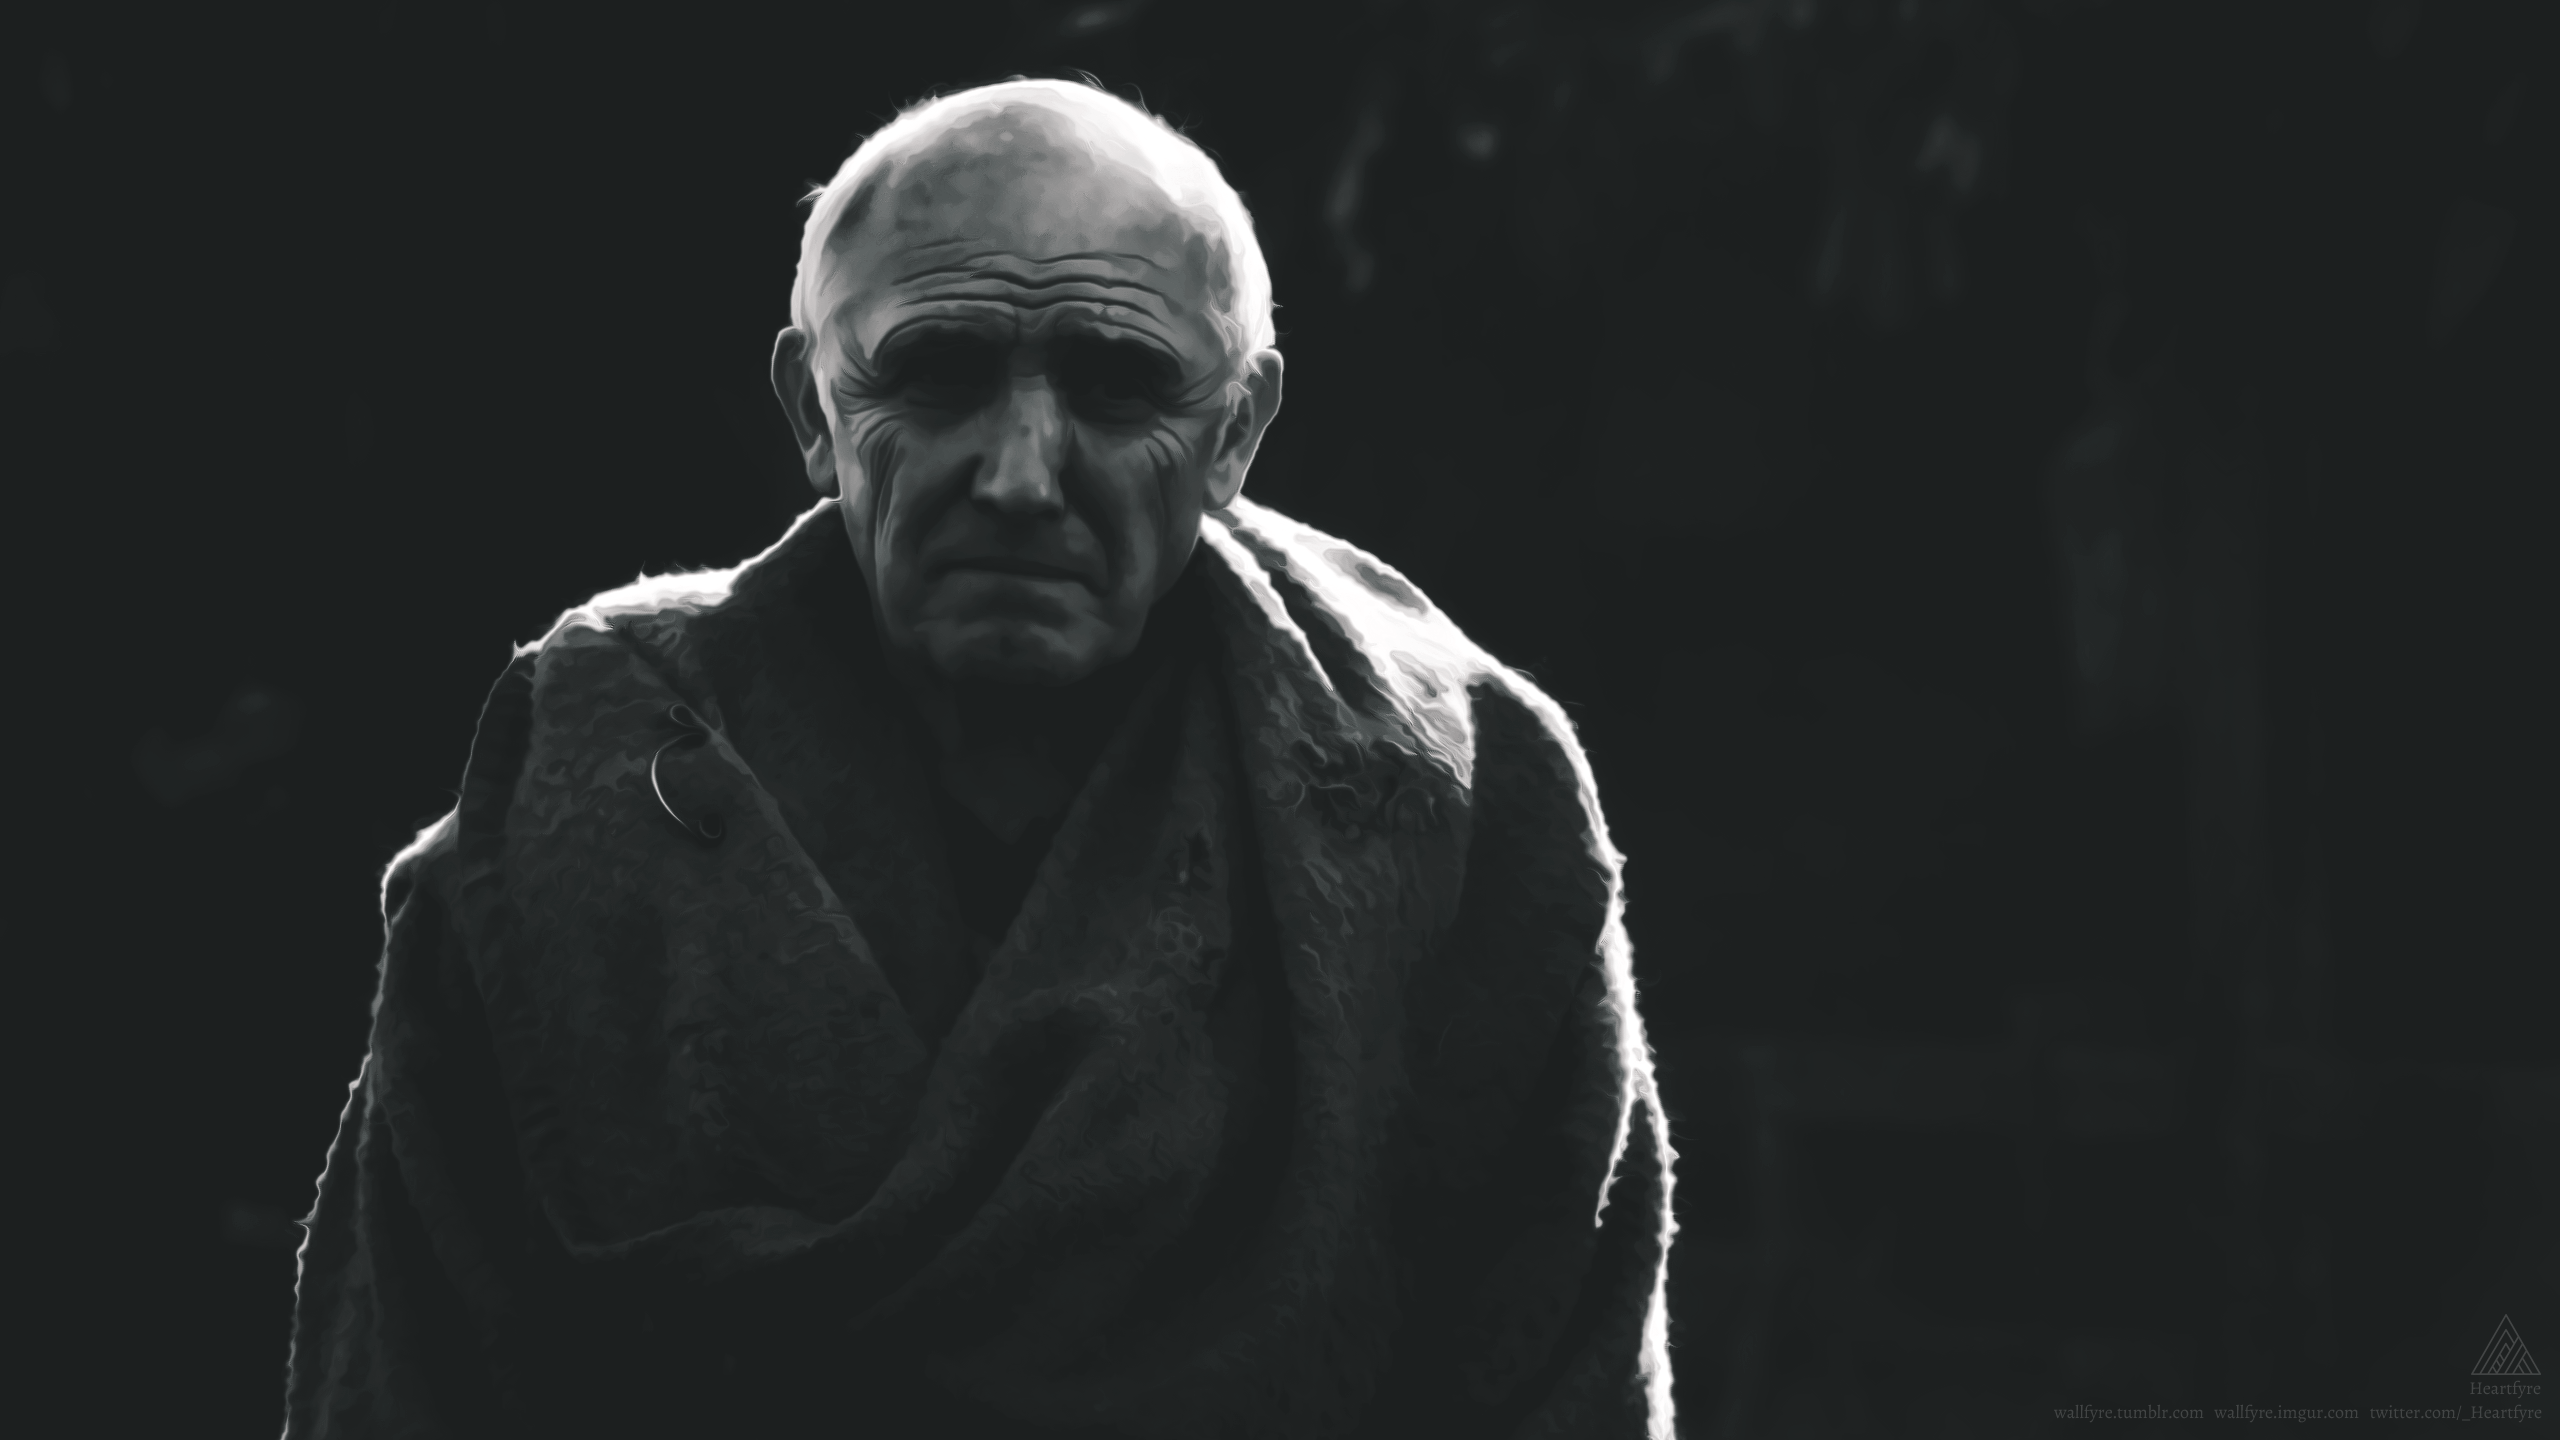 People 2560x1440 Game of Thrones HBO TV series George R. R. Martin portrait old people monochrome photoshopped watermarked heartfyre